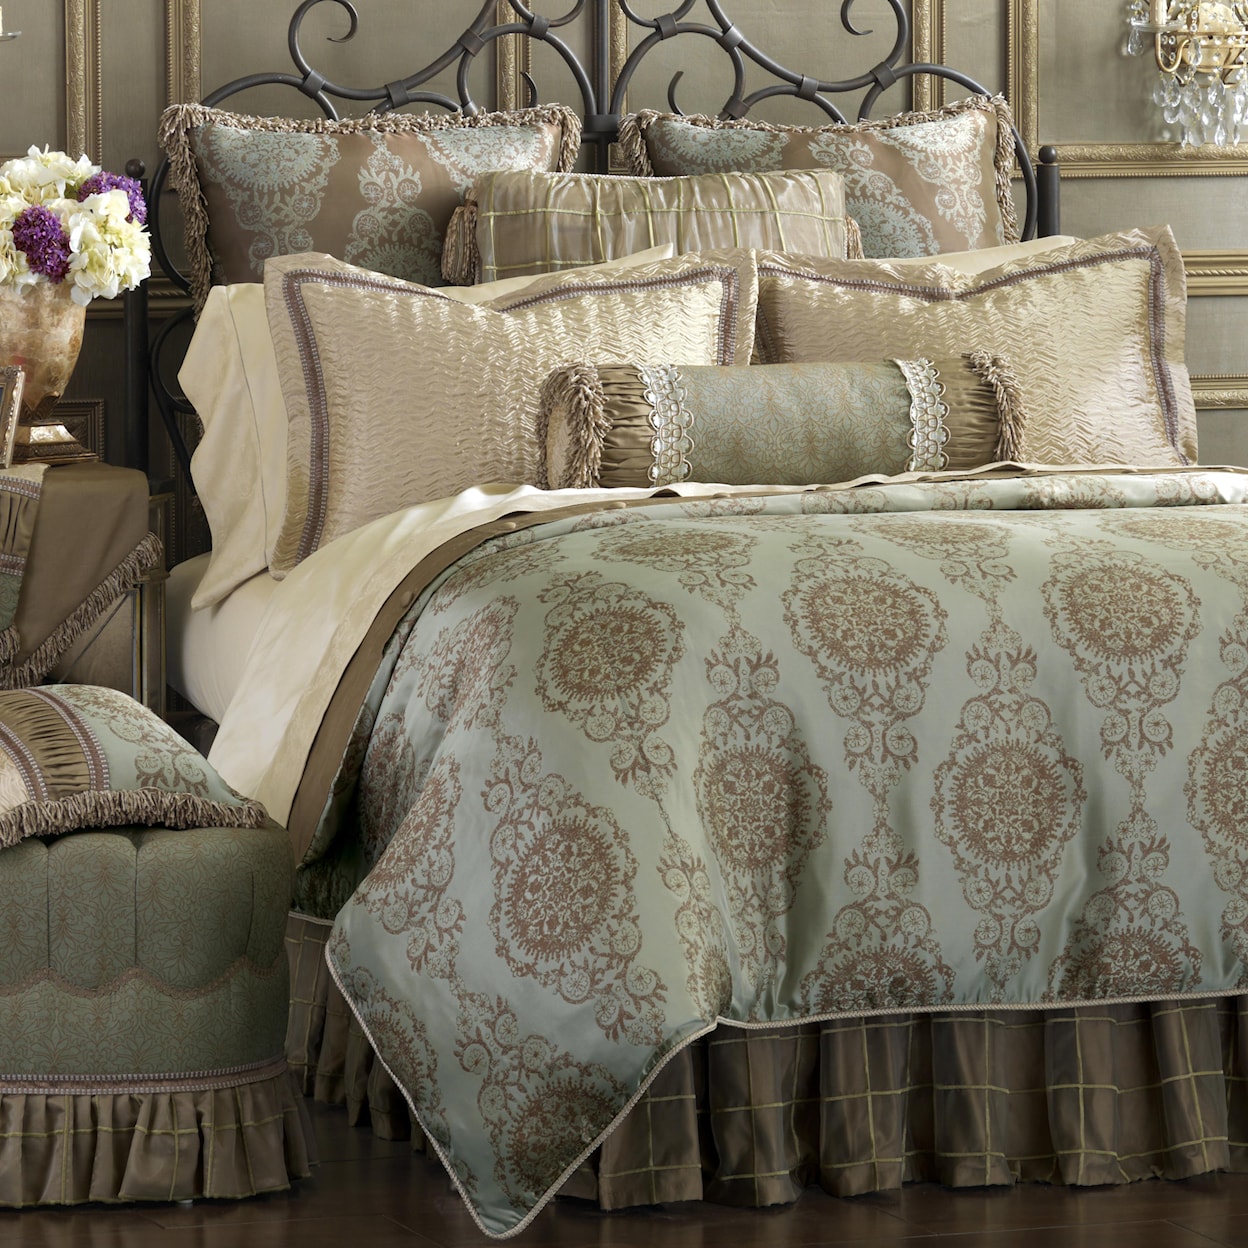 Eastern Accents Marbella King Bedset